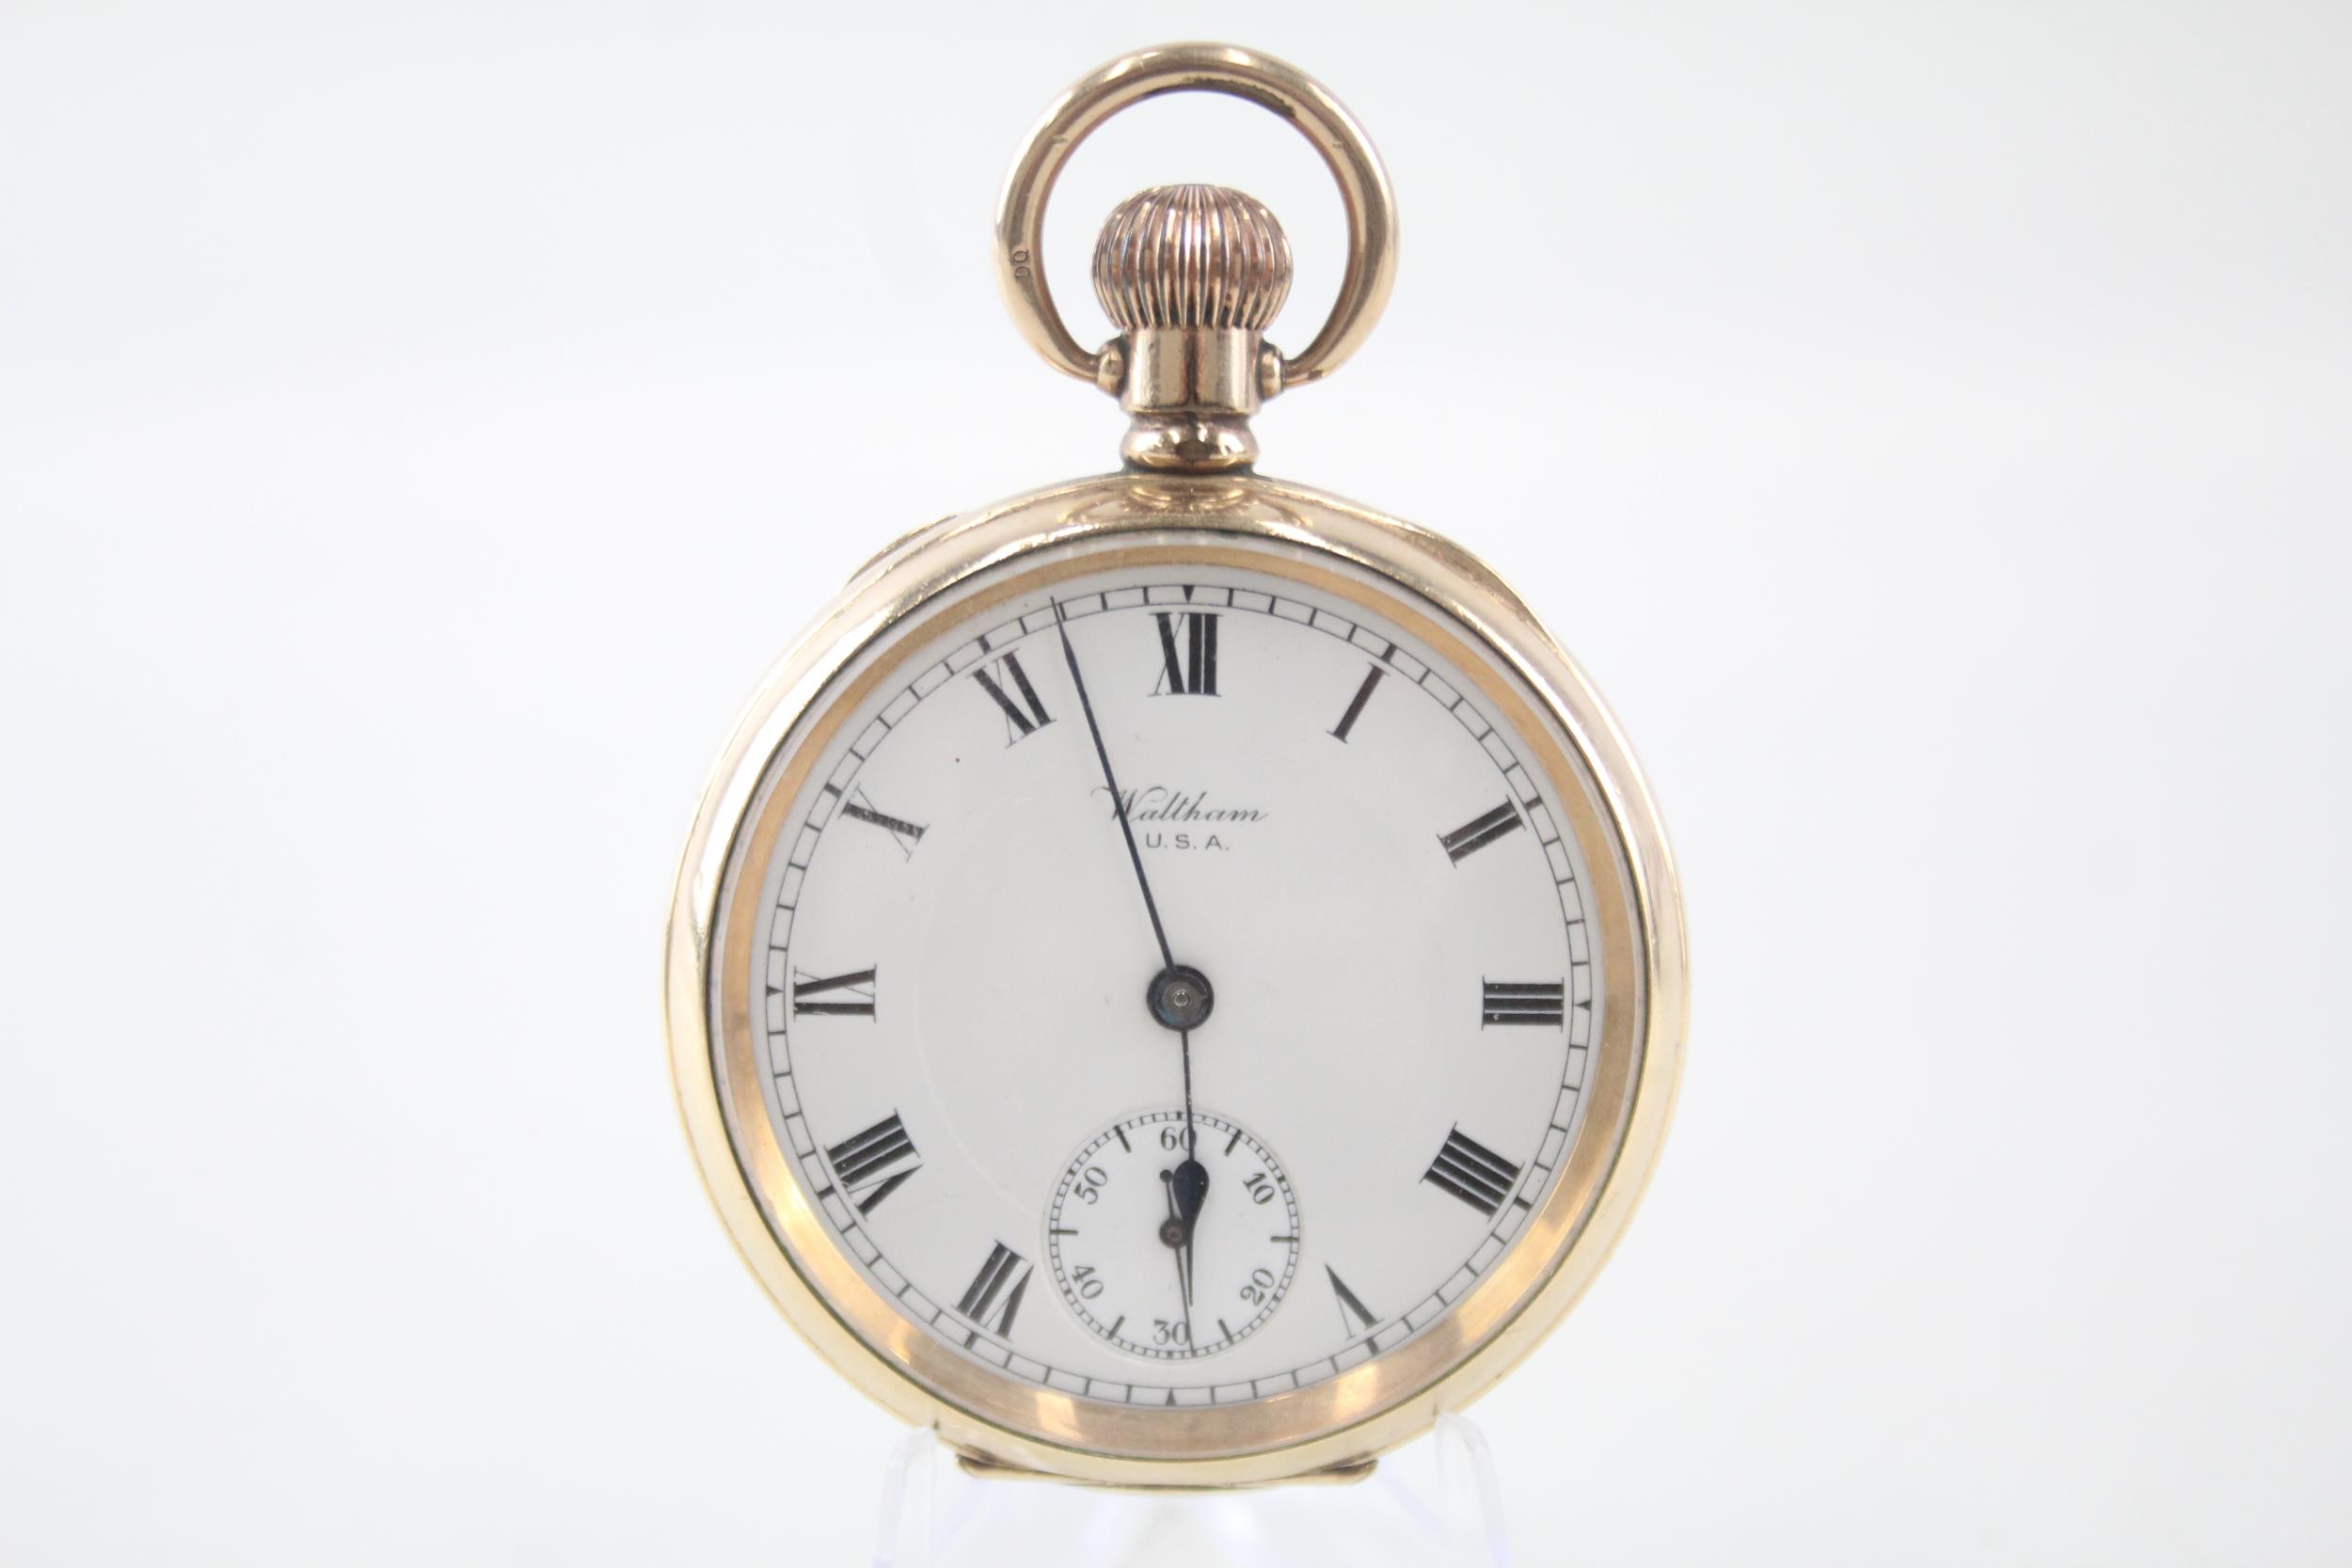 WALTHAM Gents Rolled Gold Open Face Pocket Watch Hand-wind WORKING - WALTHAM Gents Rolled Gold